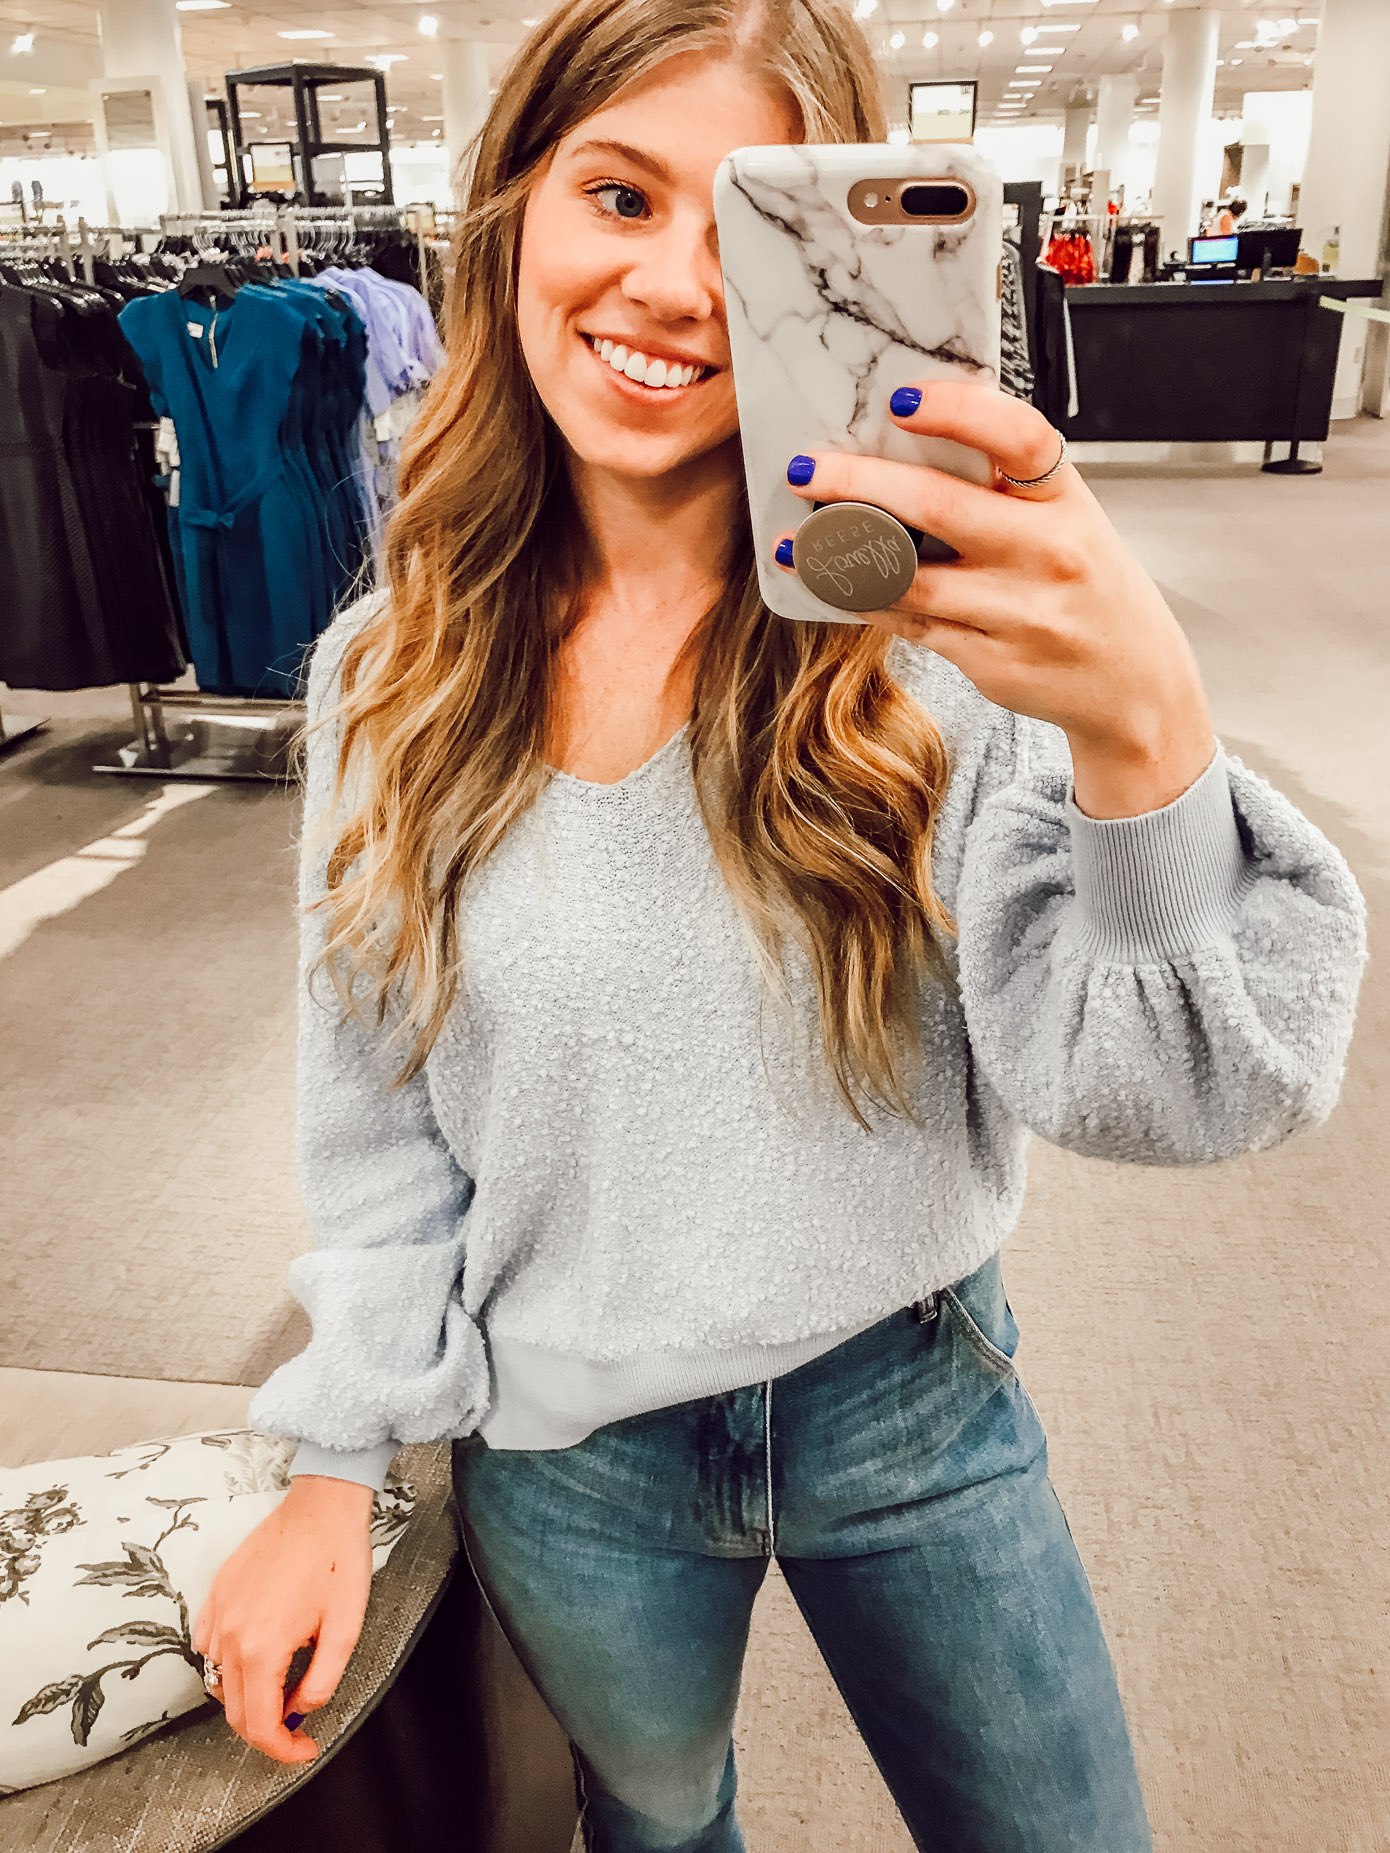 Free People Found My Friend Sweater | 2018 Nordstrom Anniversary Fitting Room Session featured on Louella Reese Life & Style Blog